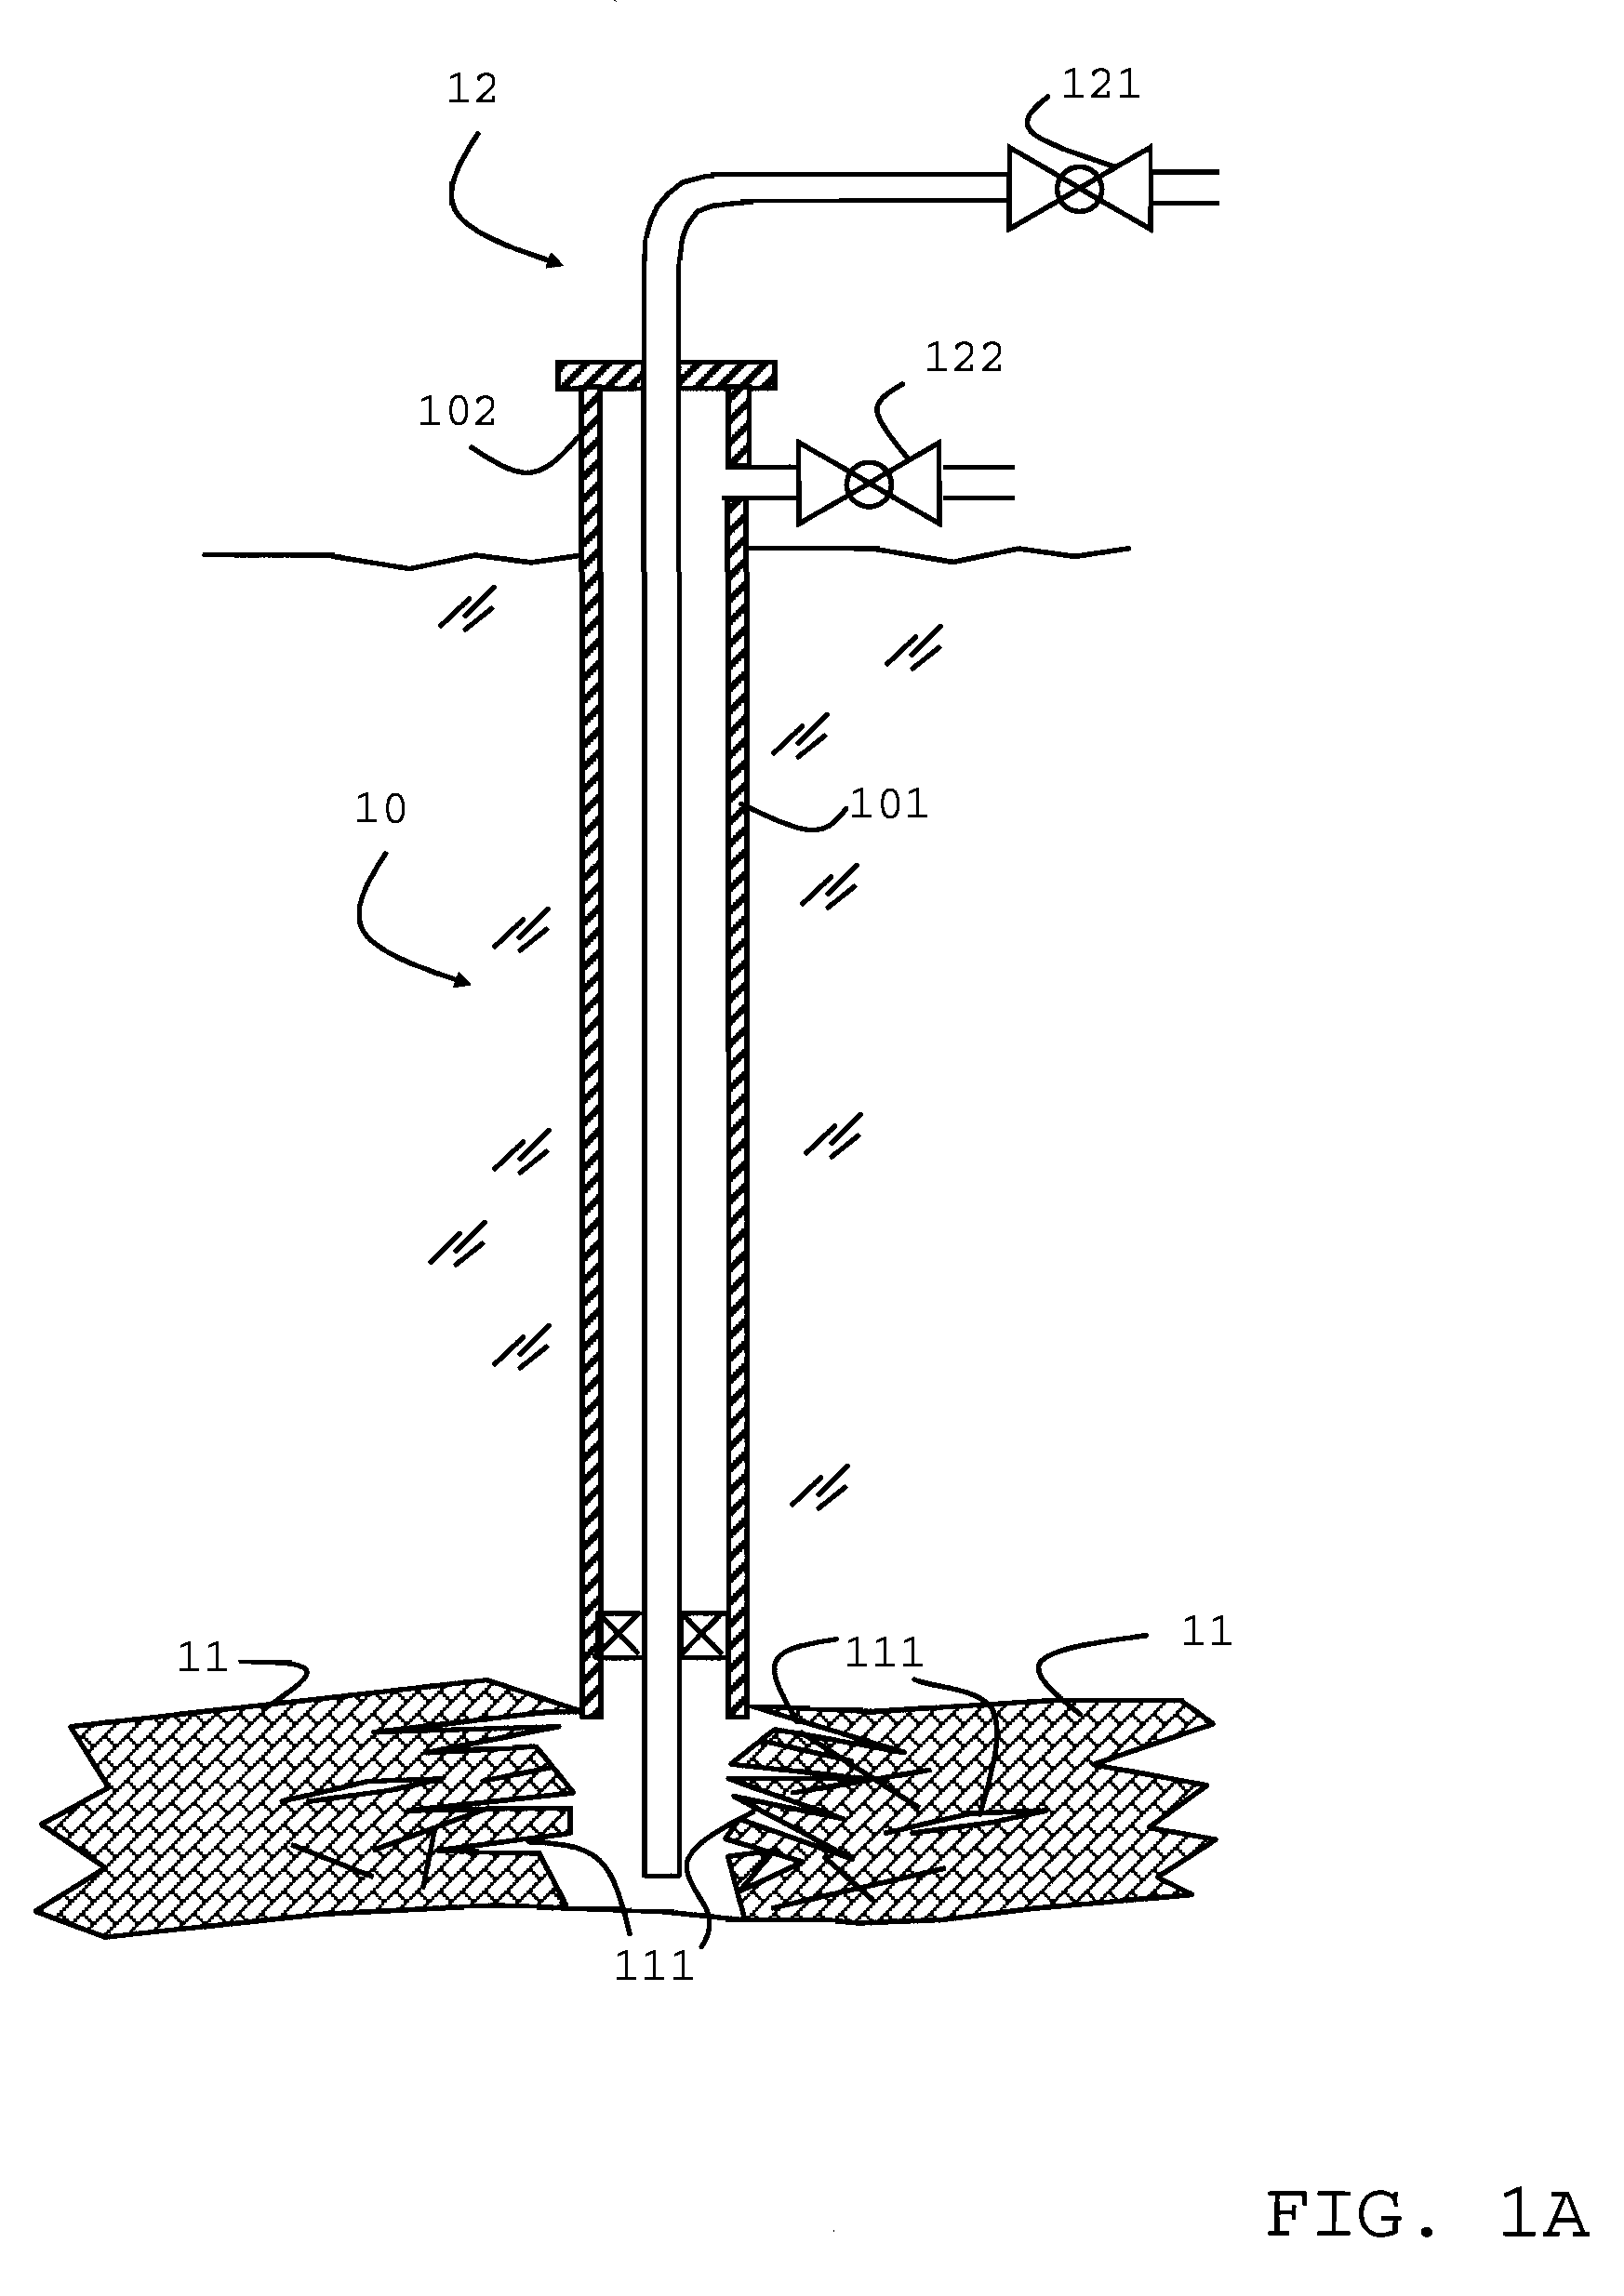 Method of fracturing a coalbed gas reservoir